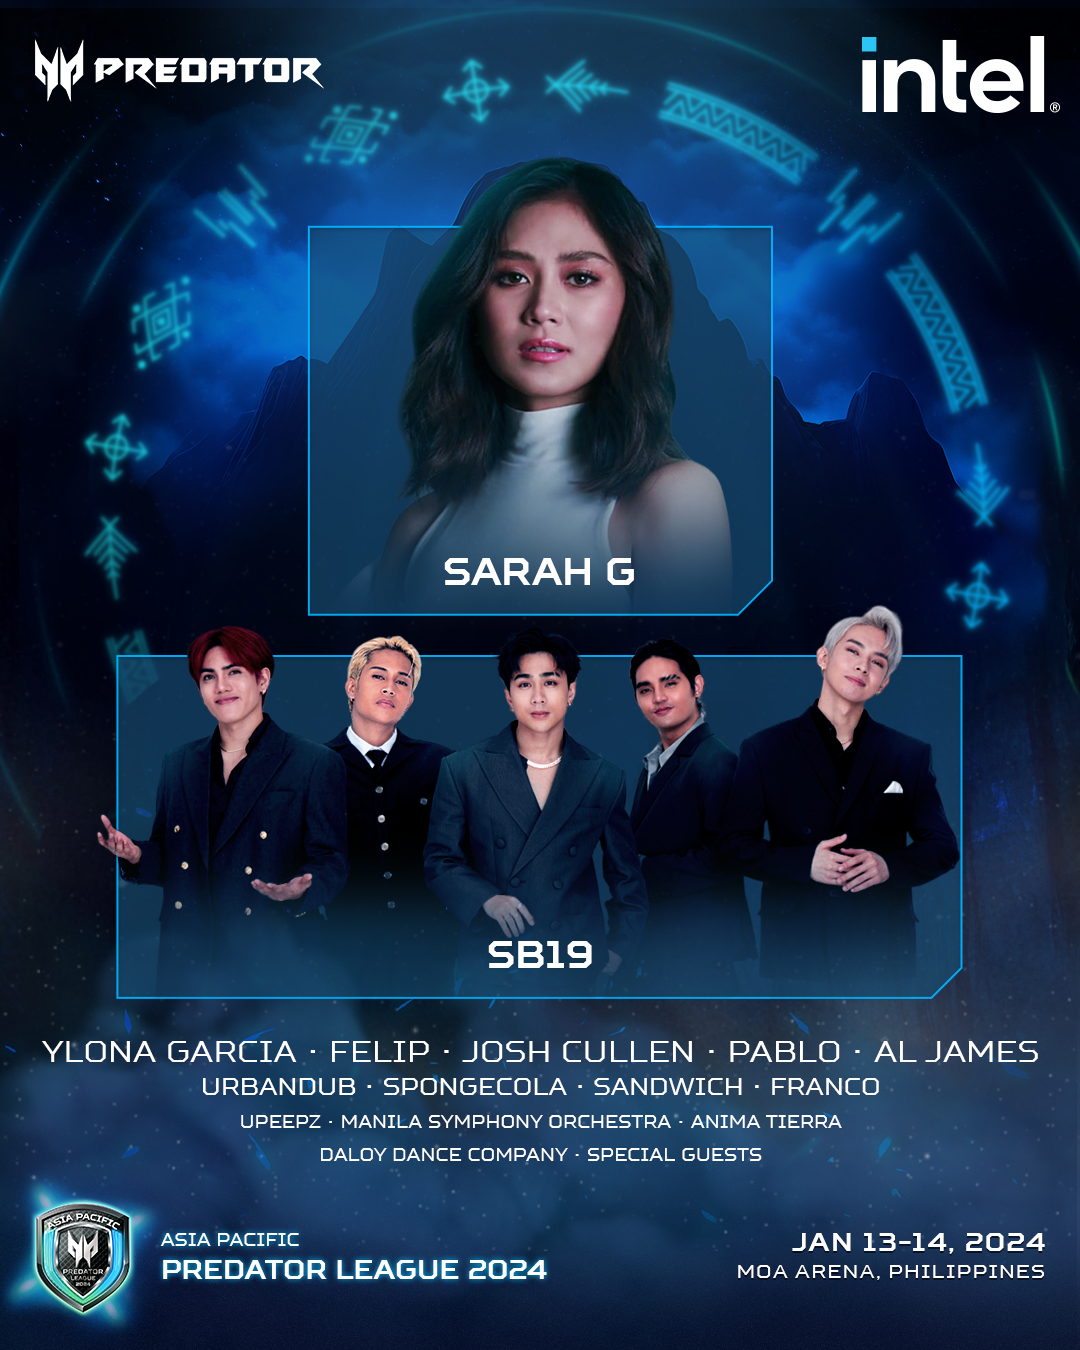 Sarah G, SB19 will set the Asia Pacific Predator League 2024 Grand Finals stage on fire with #AceYourWorld